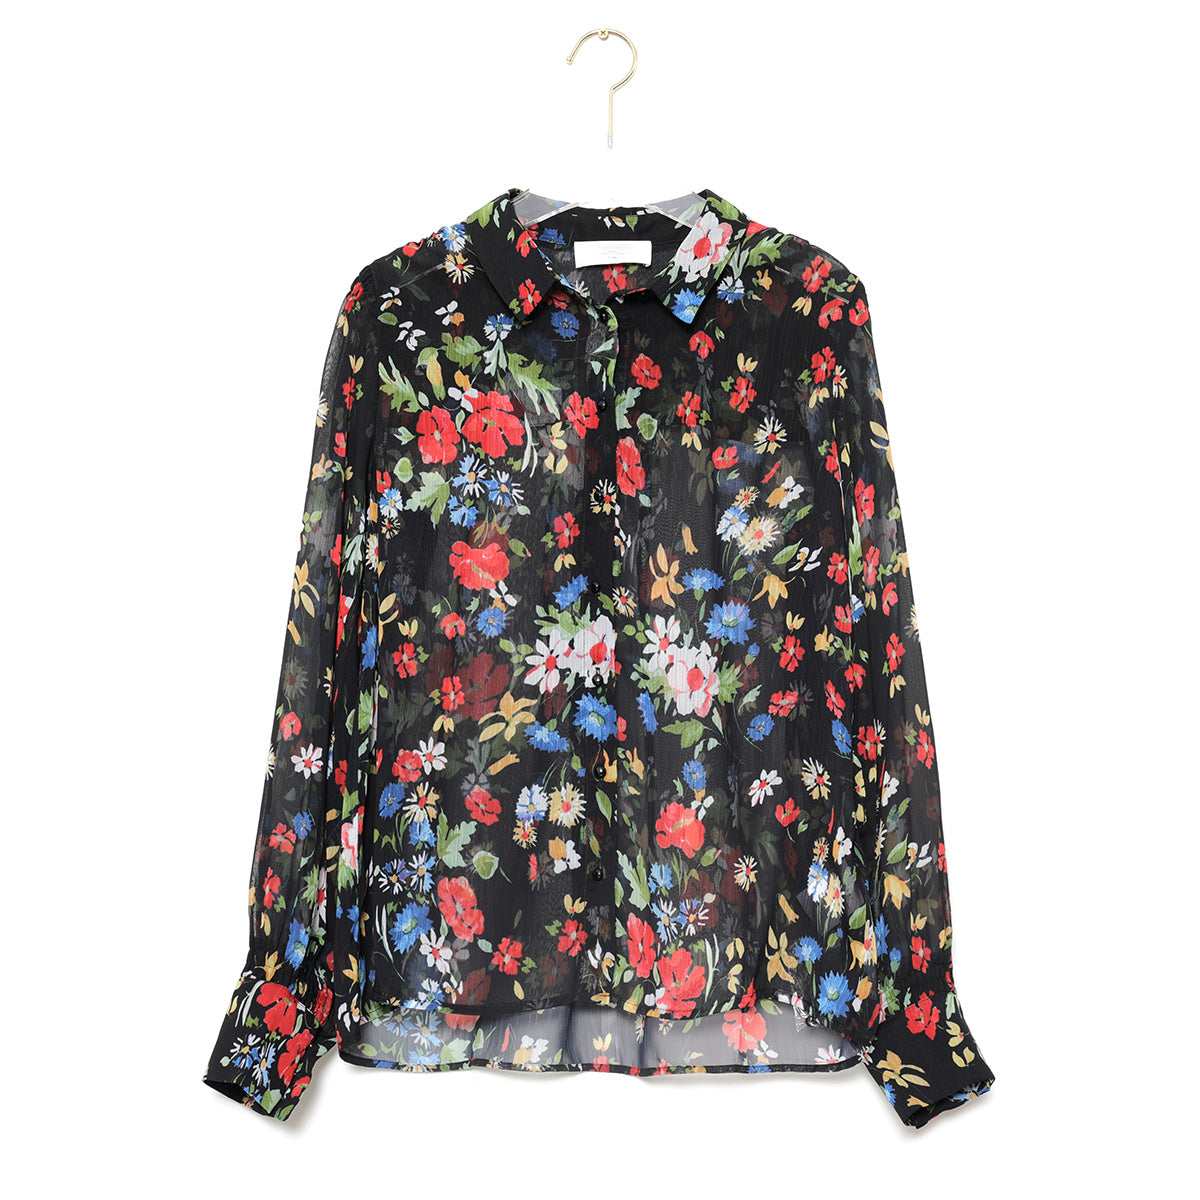 Women's Colorful Garden Floral Beach Shirt – bloom with vibrant elegance on the beach.